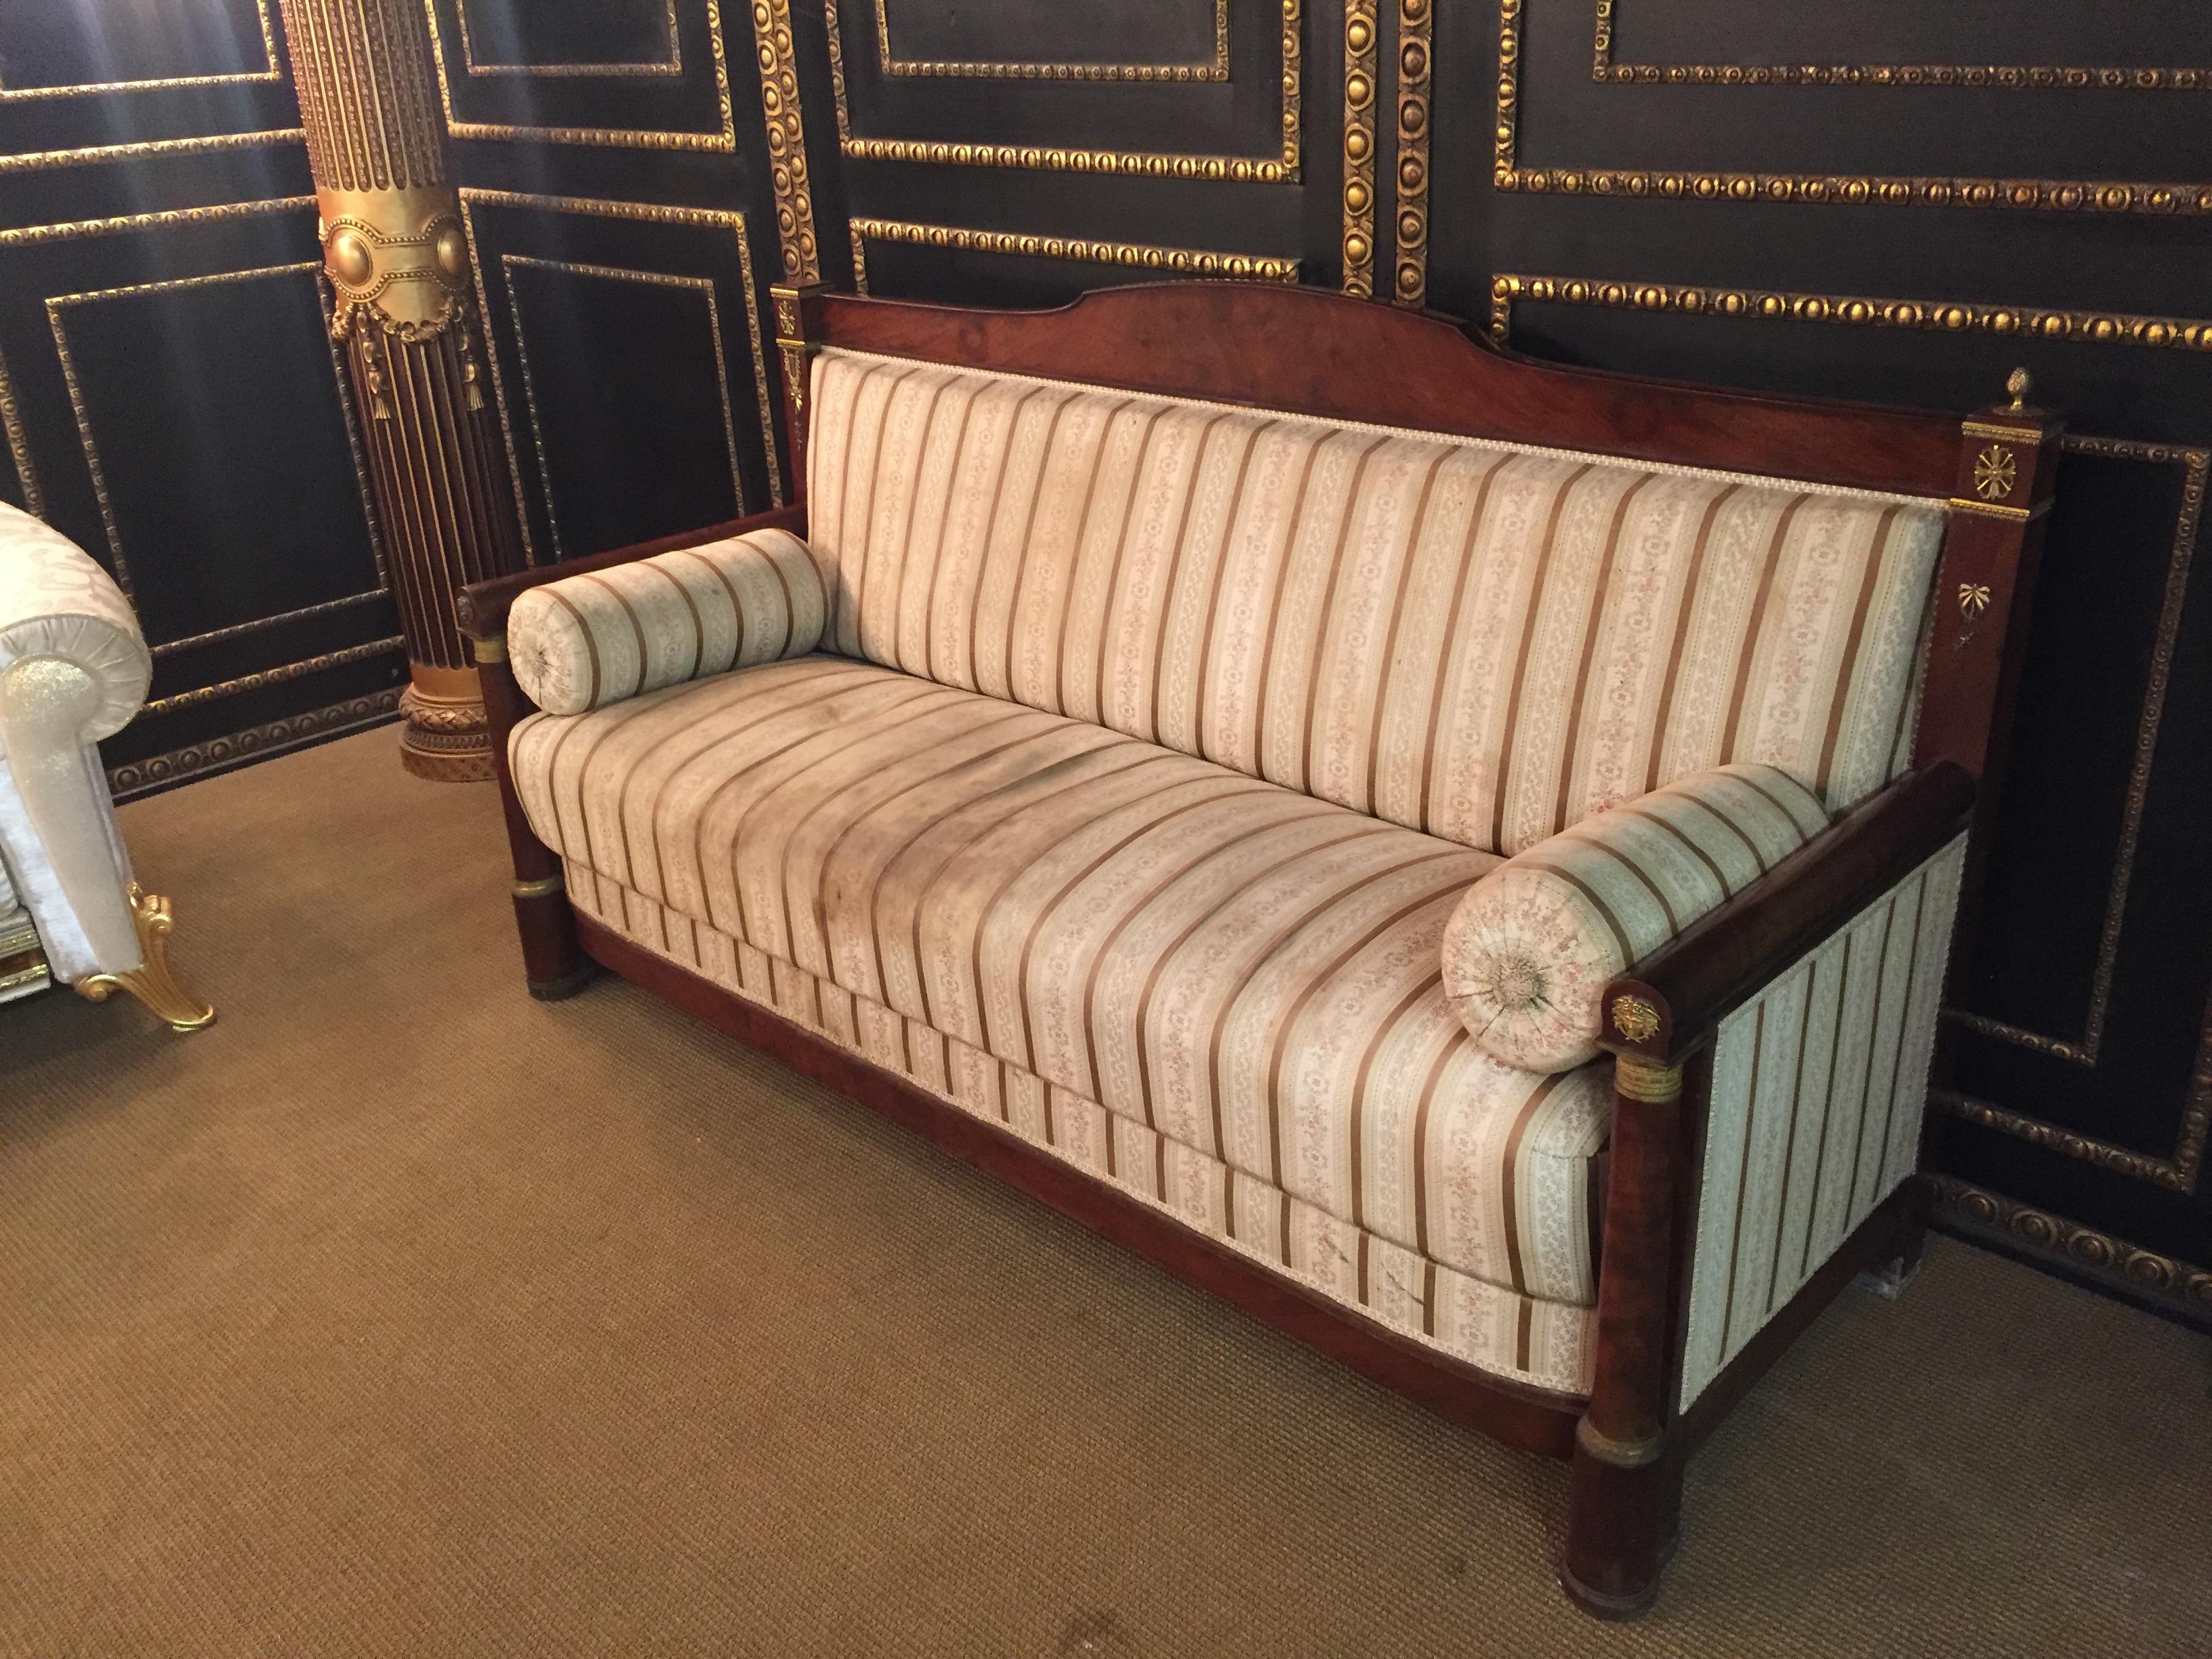 Original French Empire sofa, circa 1800.
Mahogany,
right and left, each with columns and fire-gilt bronze fittings.

Some bronze are missing.

Polstereung would have to be renewed on request we can do that for you.